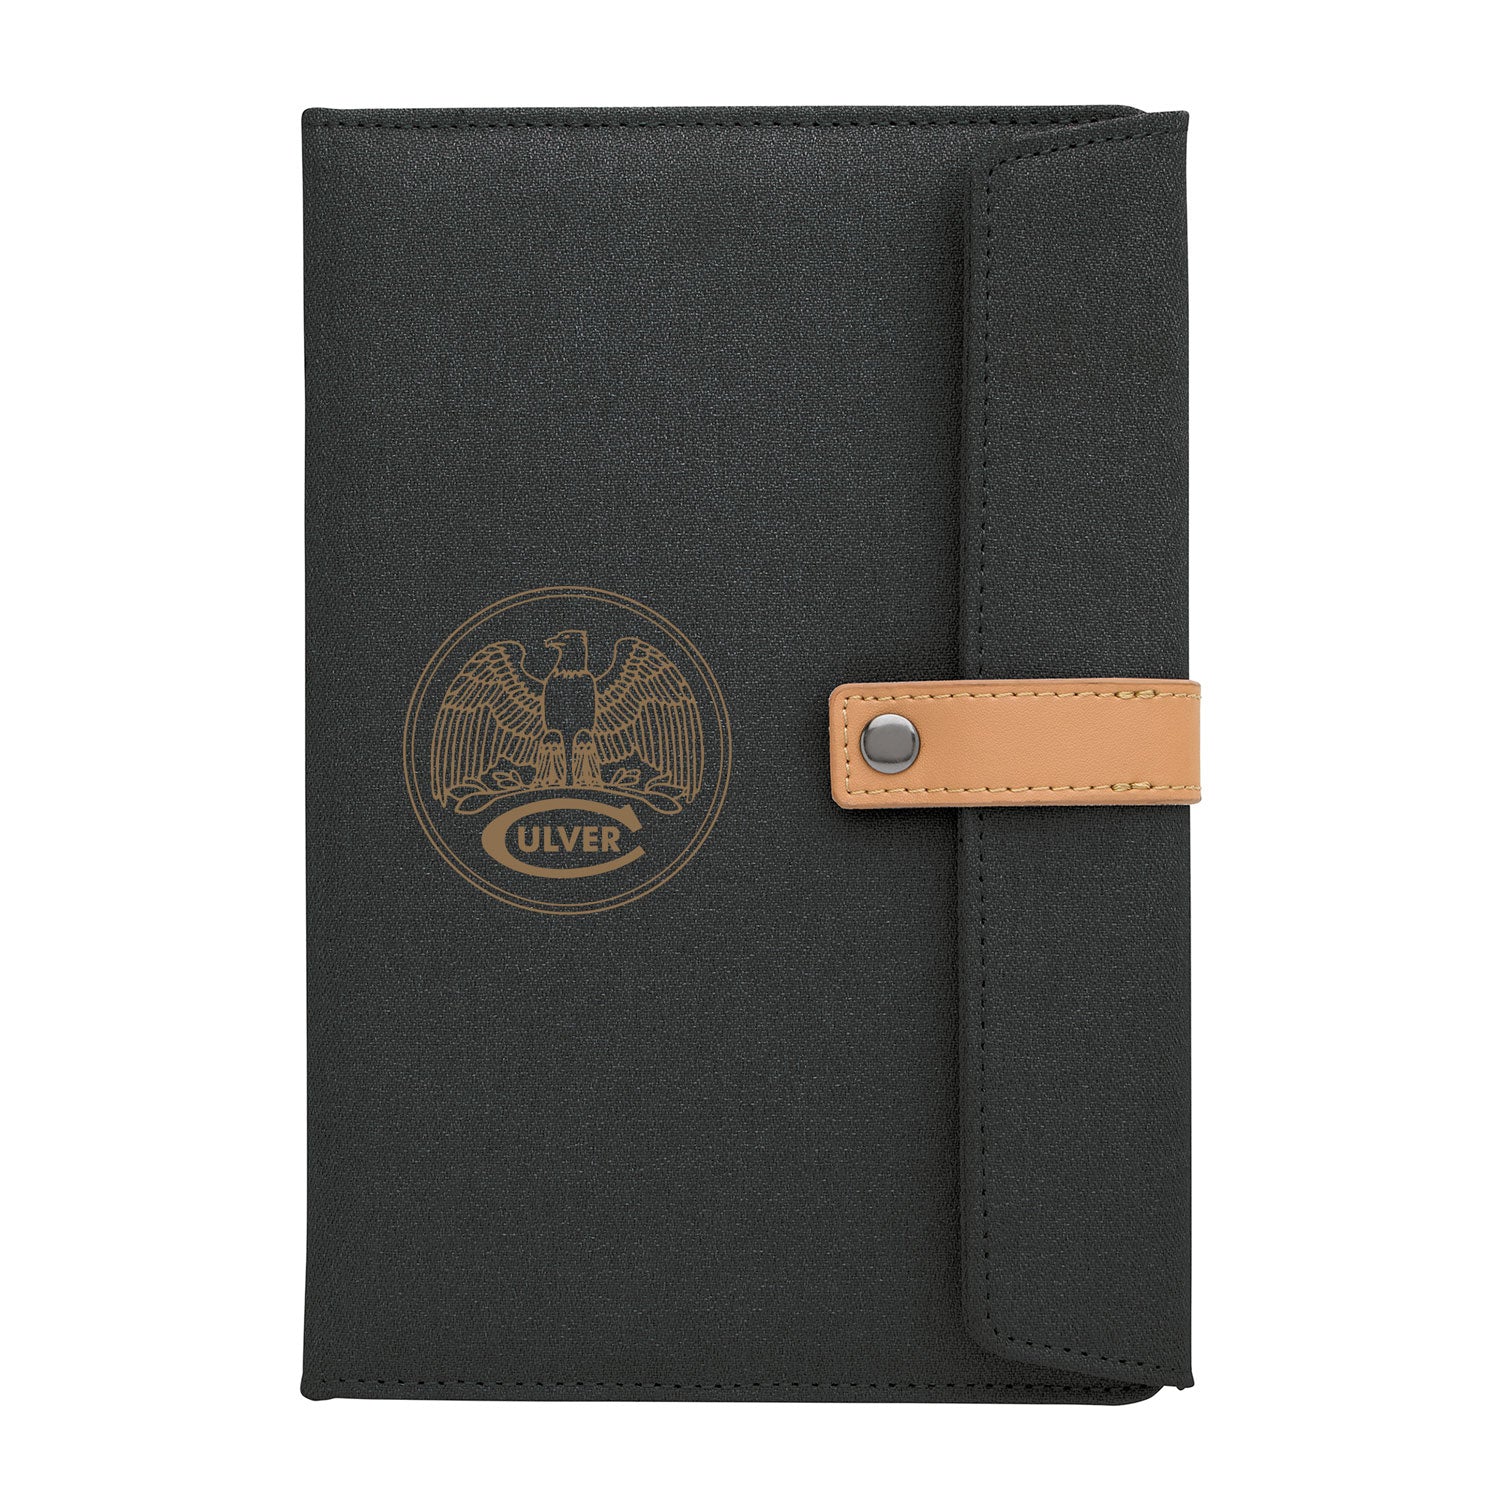 Culver Academies Two-Tone Journal with Leather Closure - Black